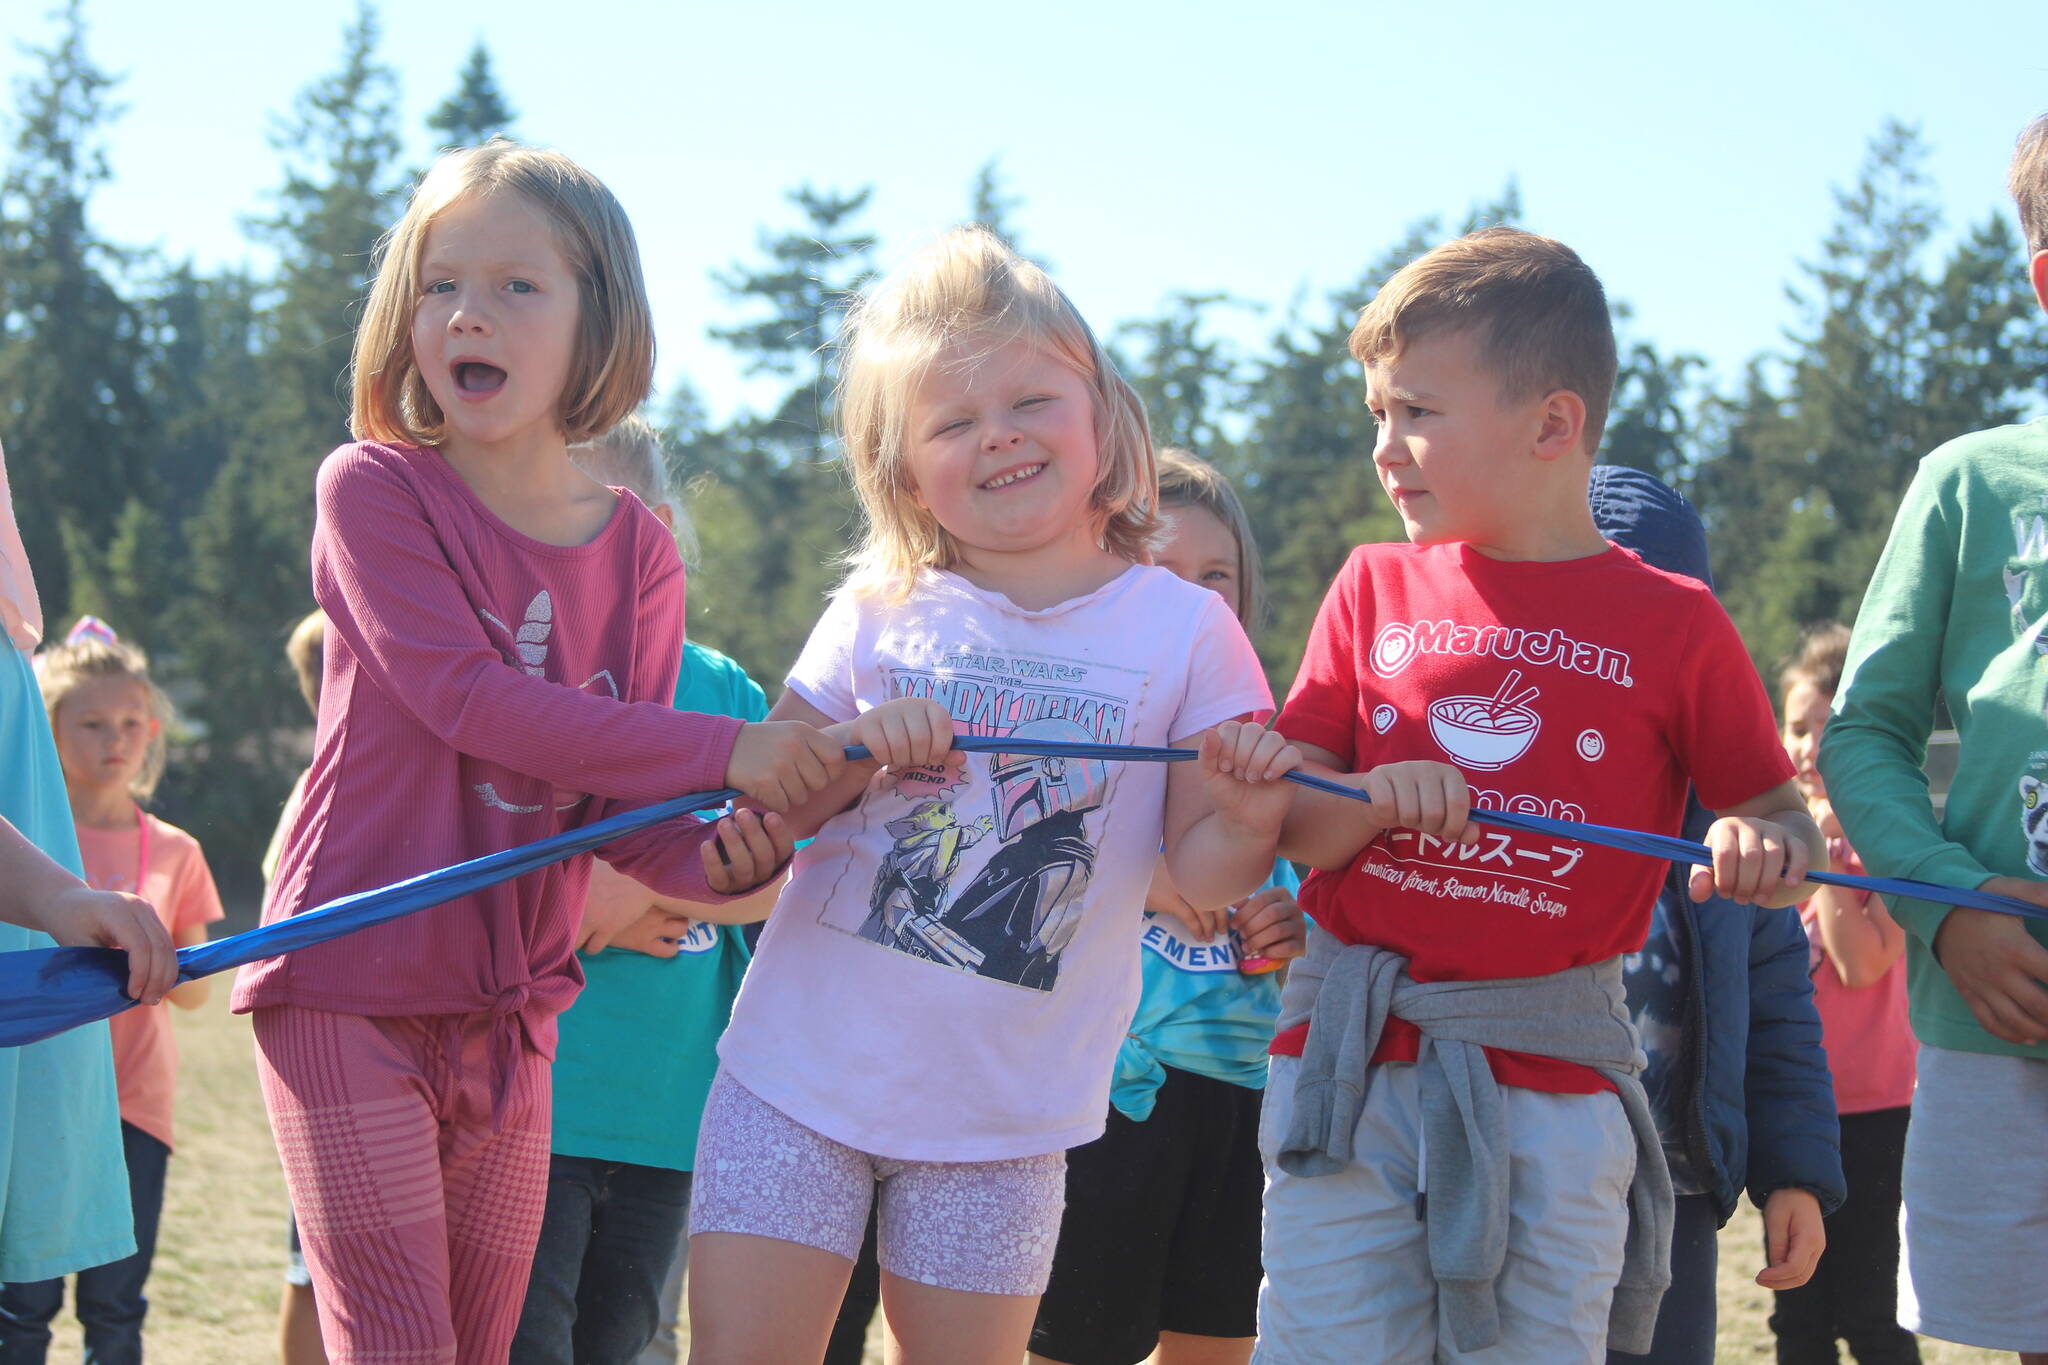 Photo by Karina Andrew/Whidbey News-Times
From left, first graders Amelia Rhodes, Chelsie Turner and Callum Macklin help hold the ribbon at the opening of the newly paved walking path at Hillcrest Elementary School Sept. 15.